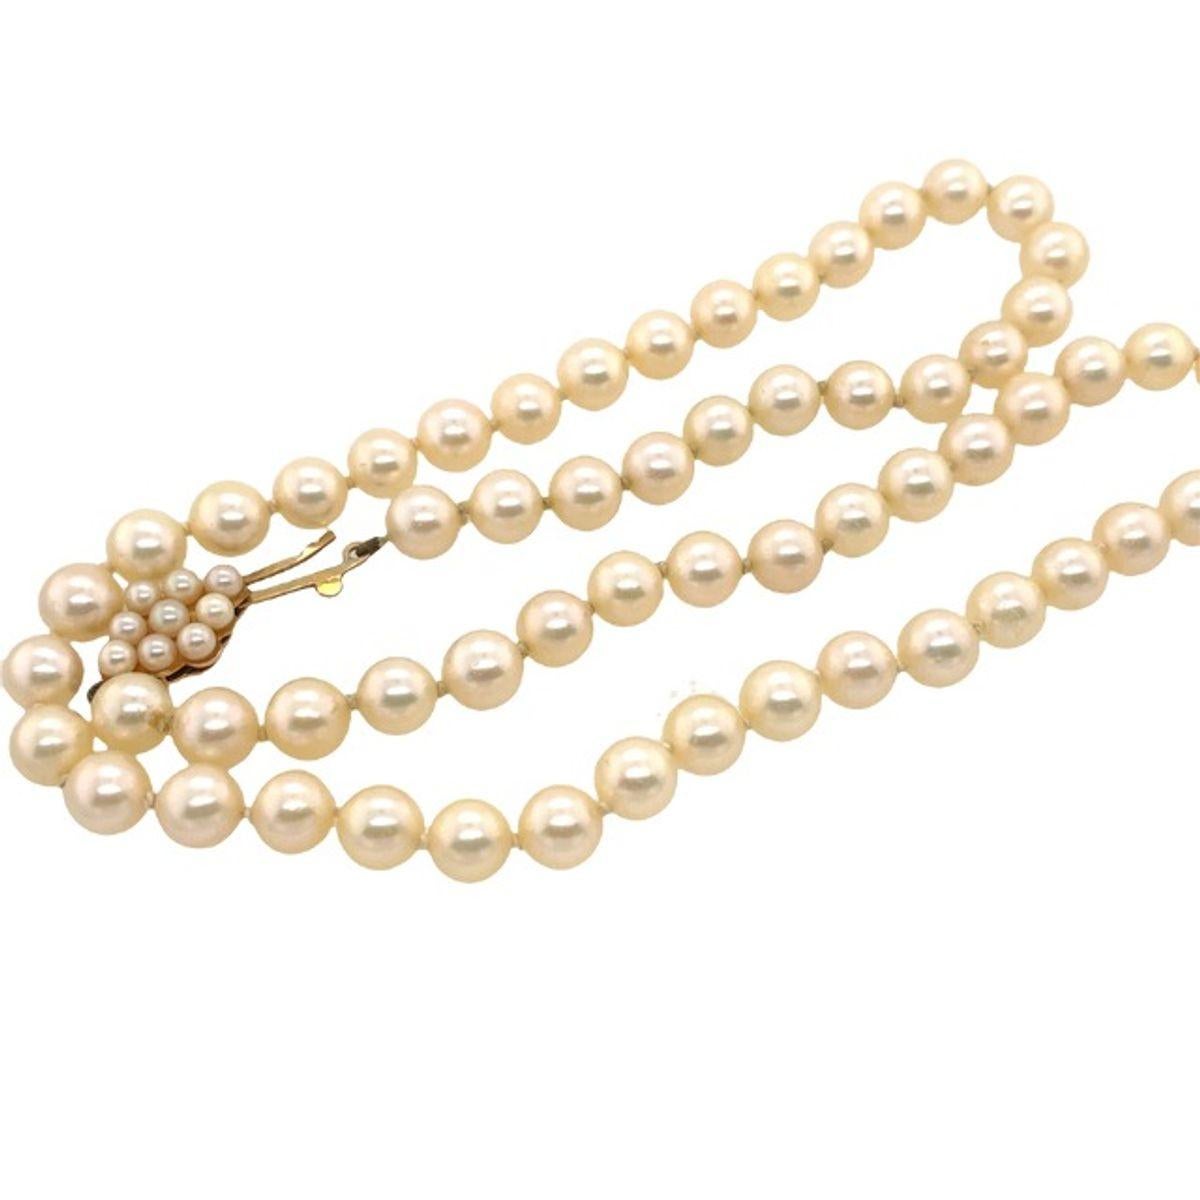 Women's Matching Cultured Pearl Necklace with 9-Cultured Pearl Clasp For Sale